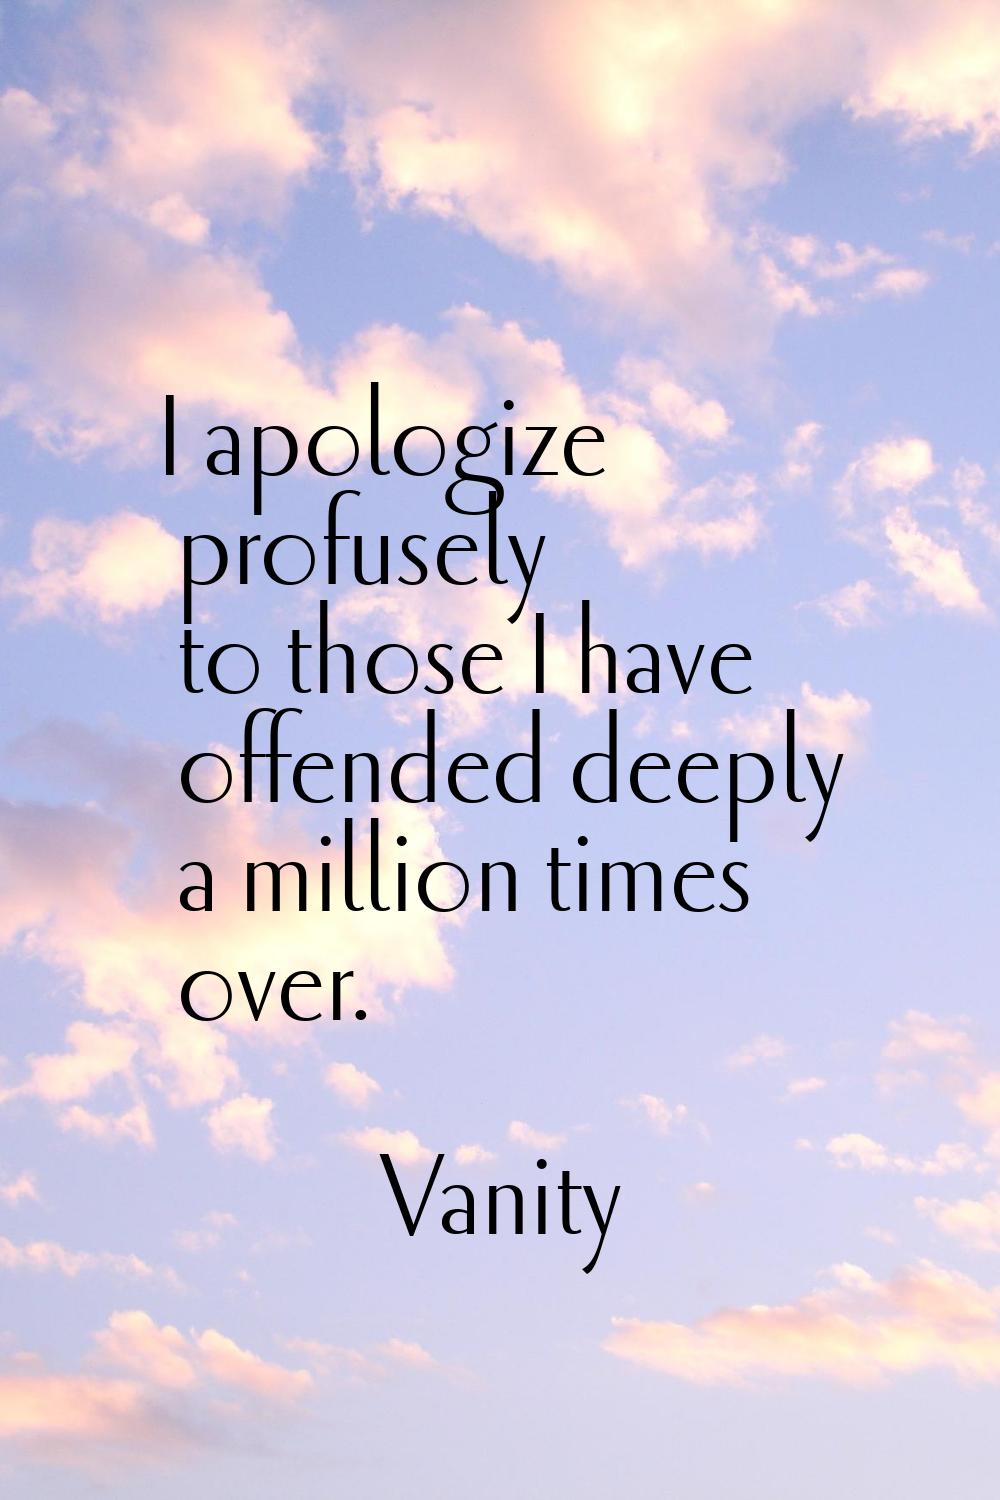 I apologize profusely to those I have offended deeply a million times over.